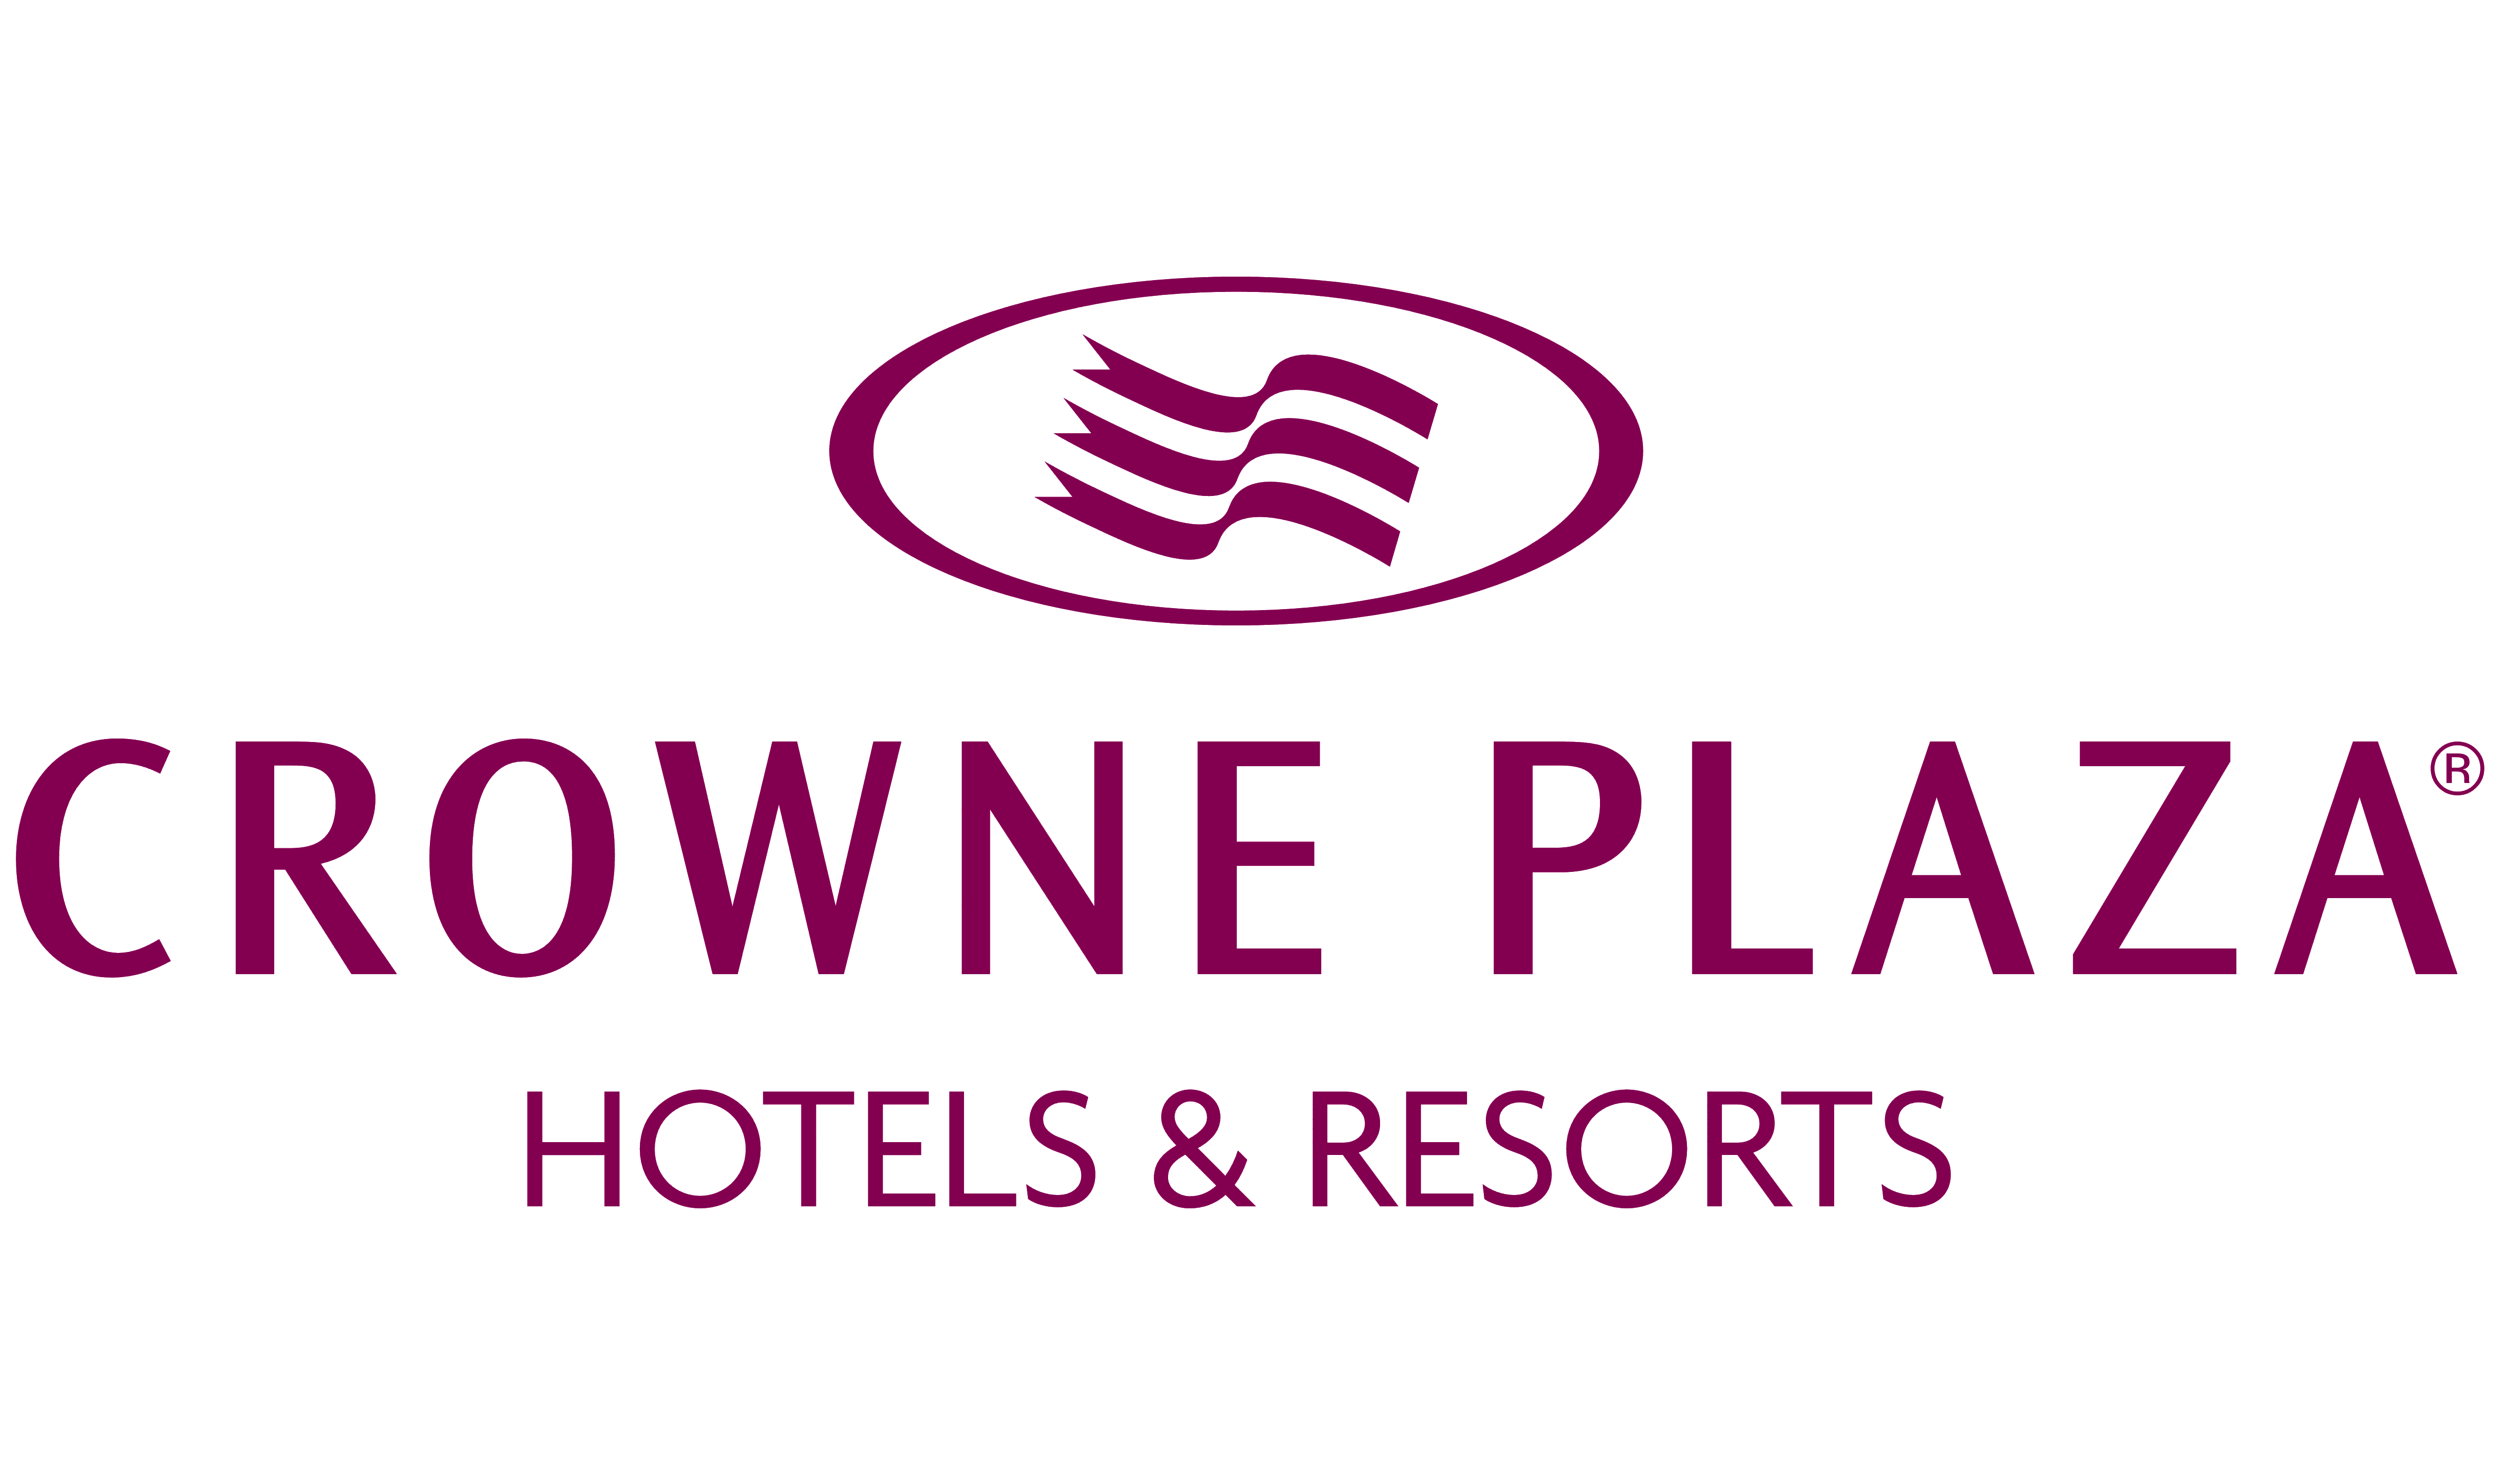 Crowne Plaza Logo Evolution History And Meaning